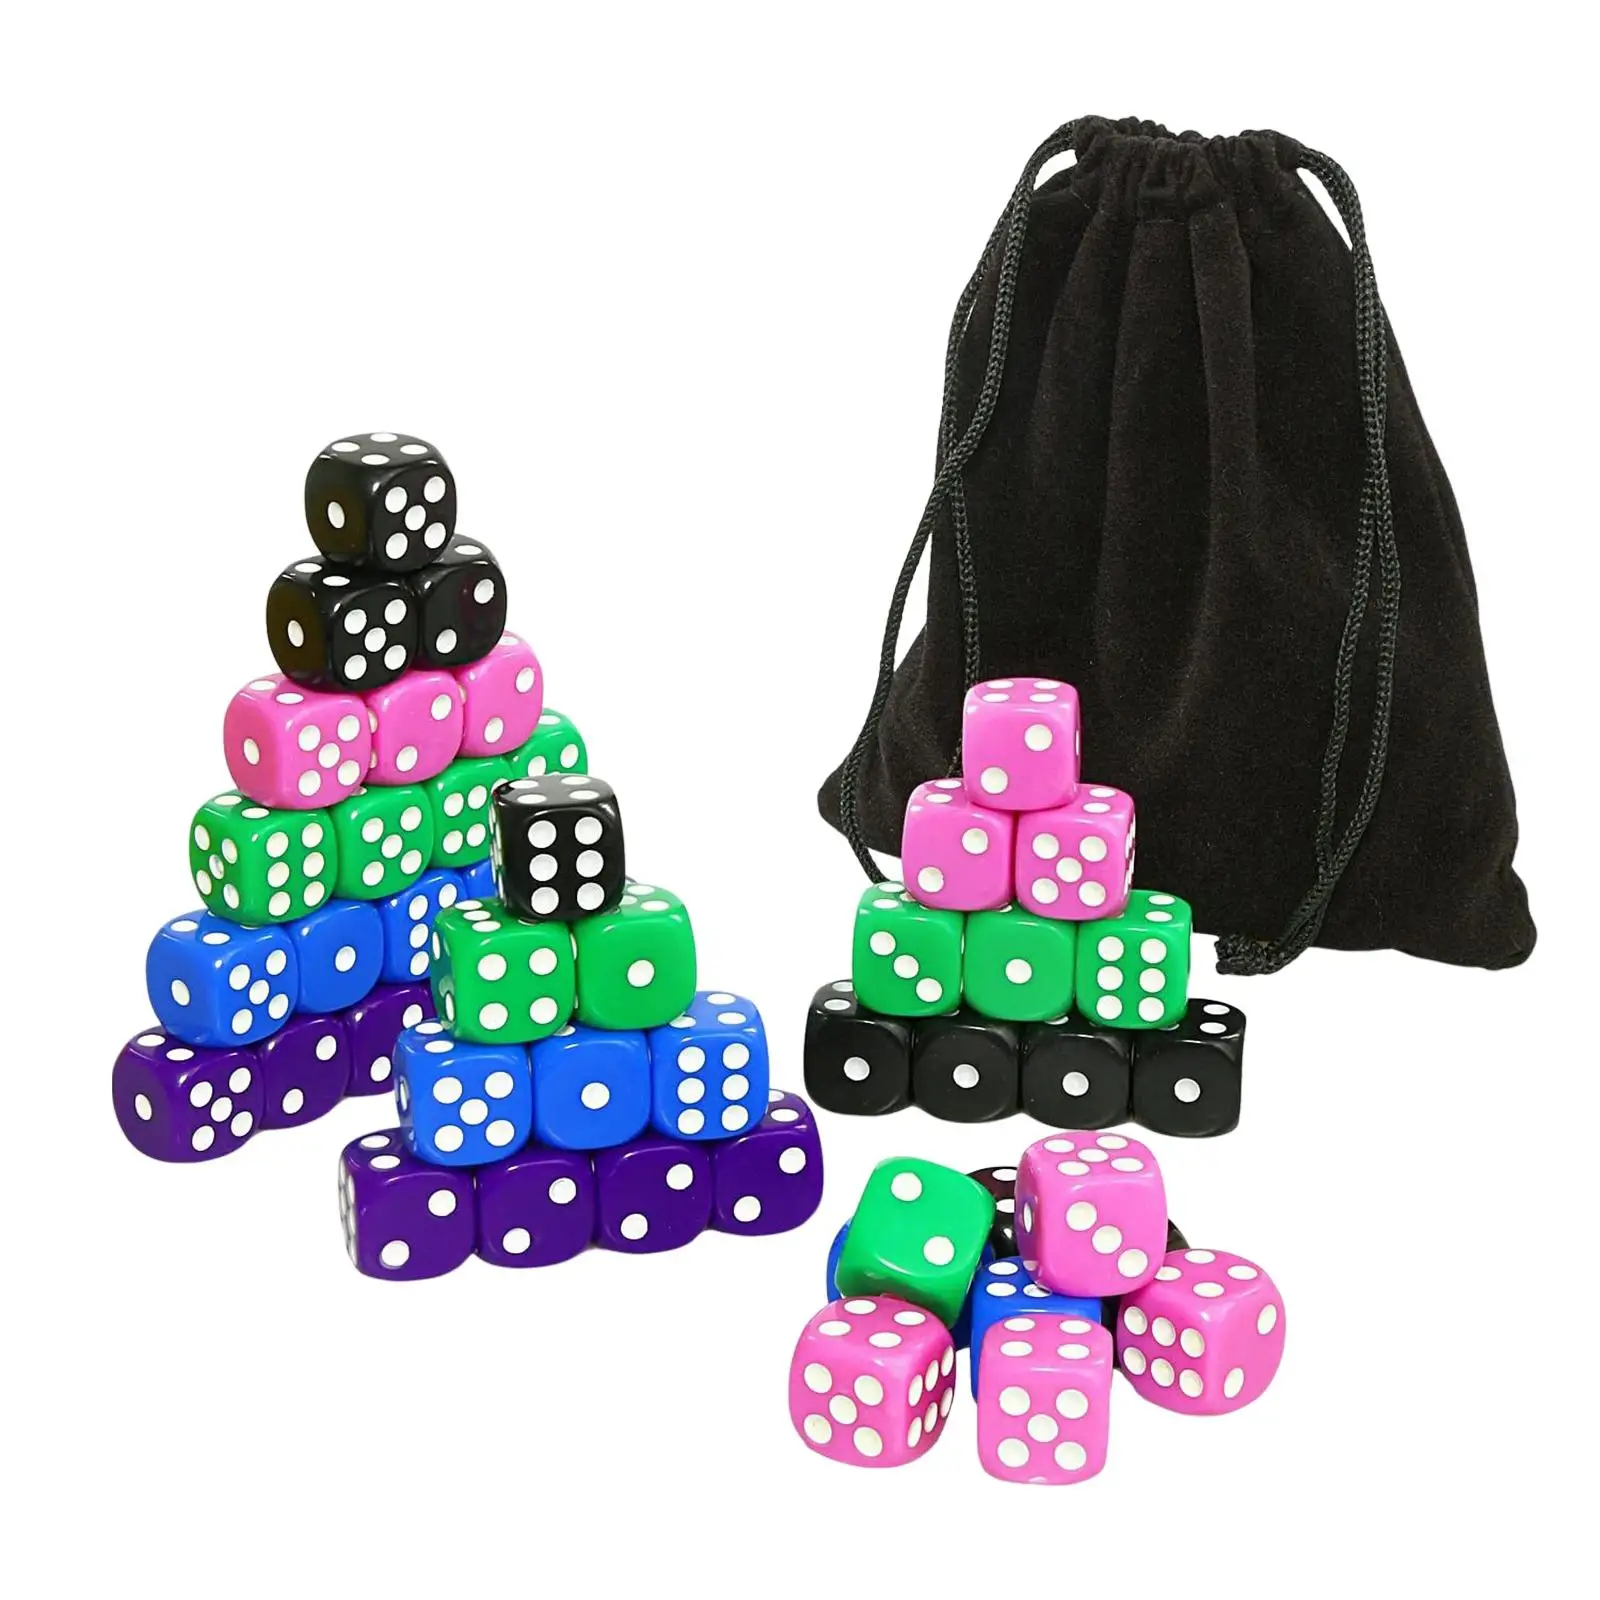 50x Six Sided Dices Set with Velvet Pouch for MTG 16mm Acrylic Dice Board Game